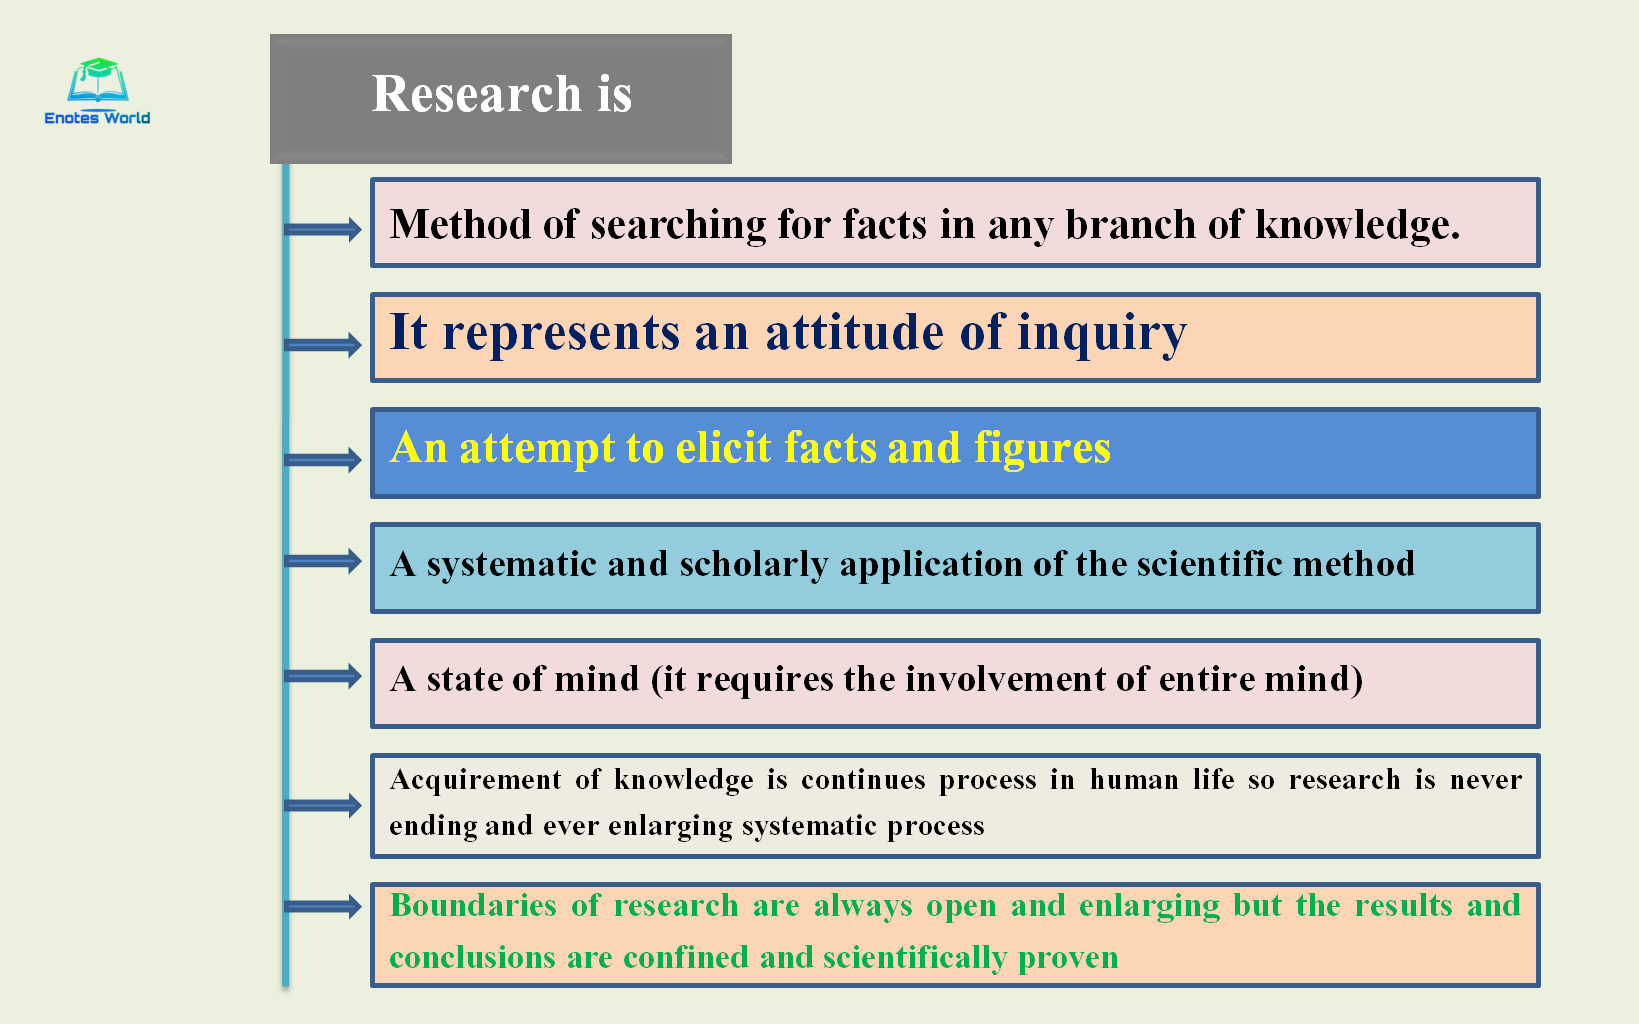 a research is a